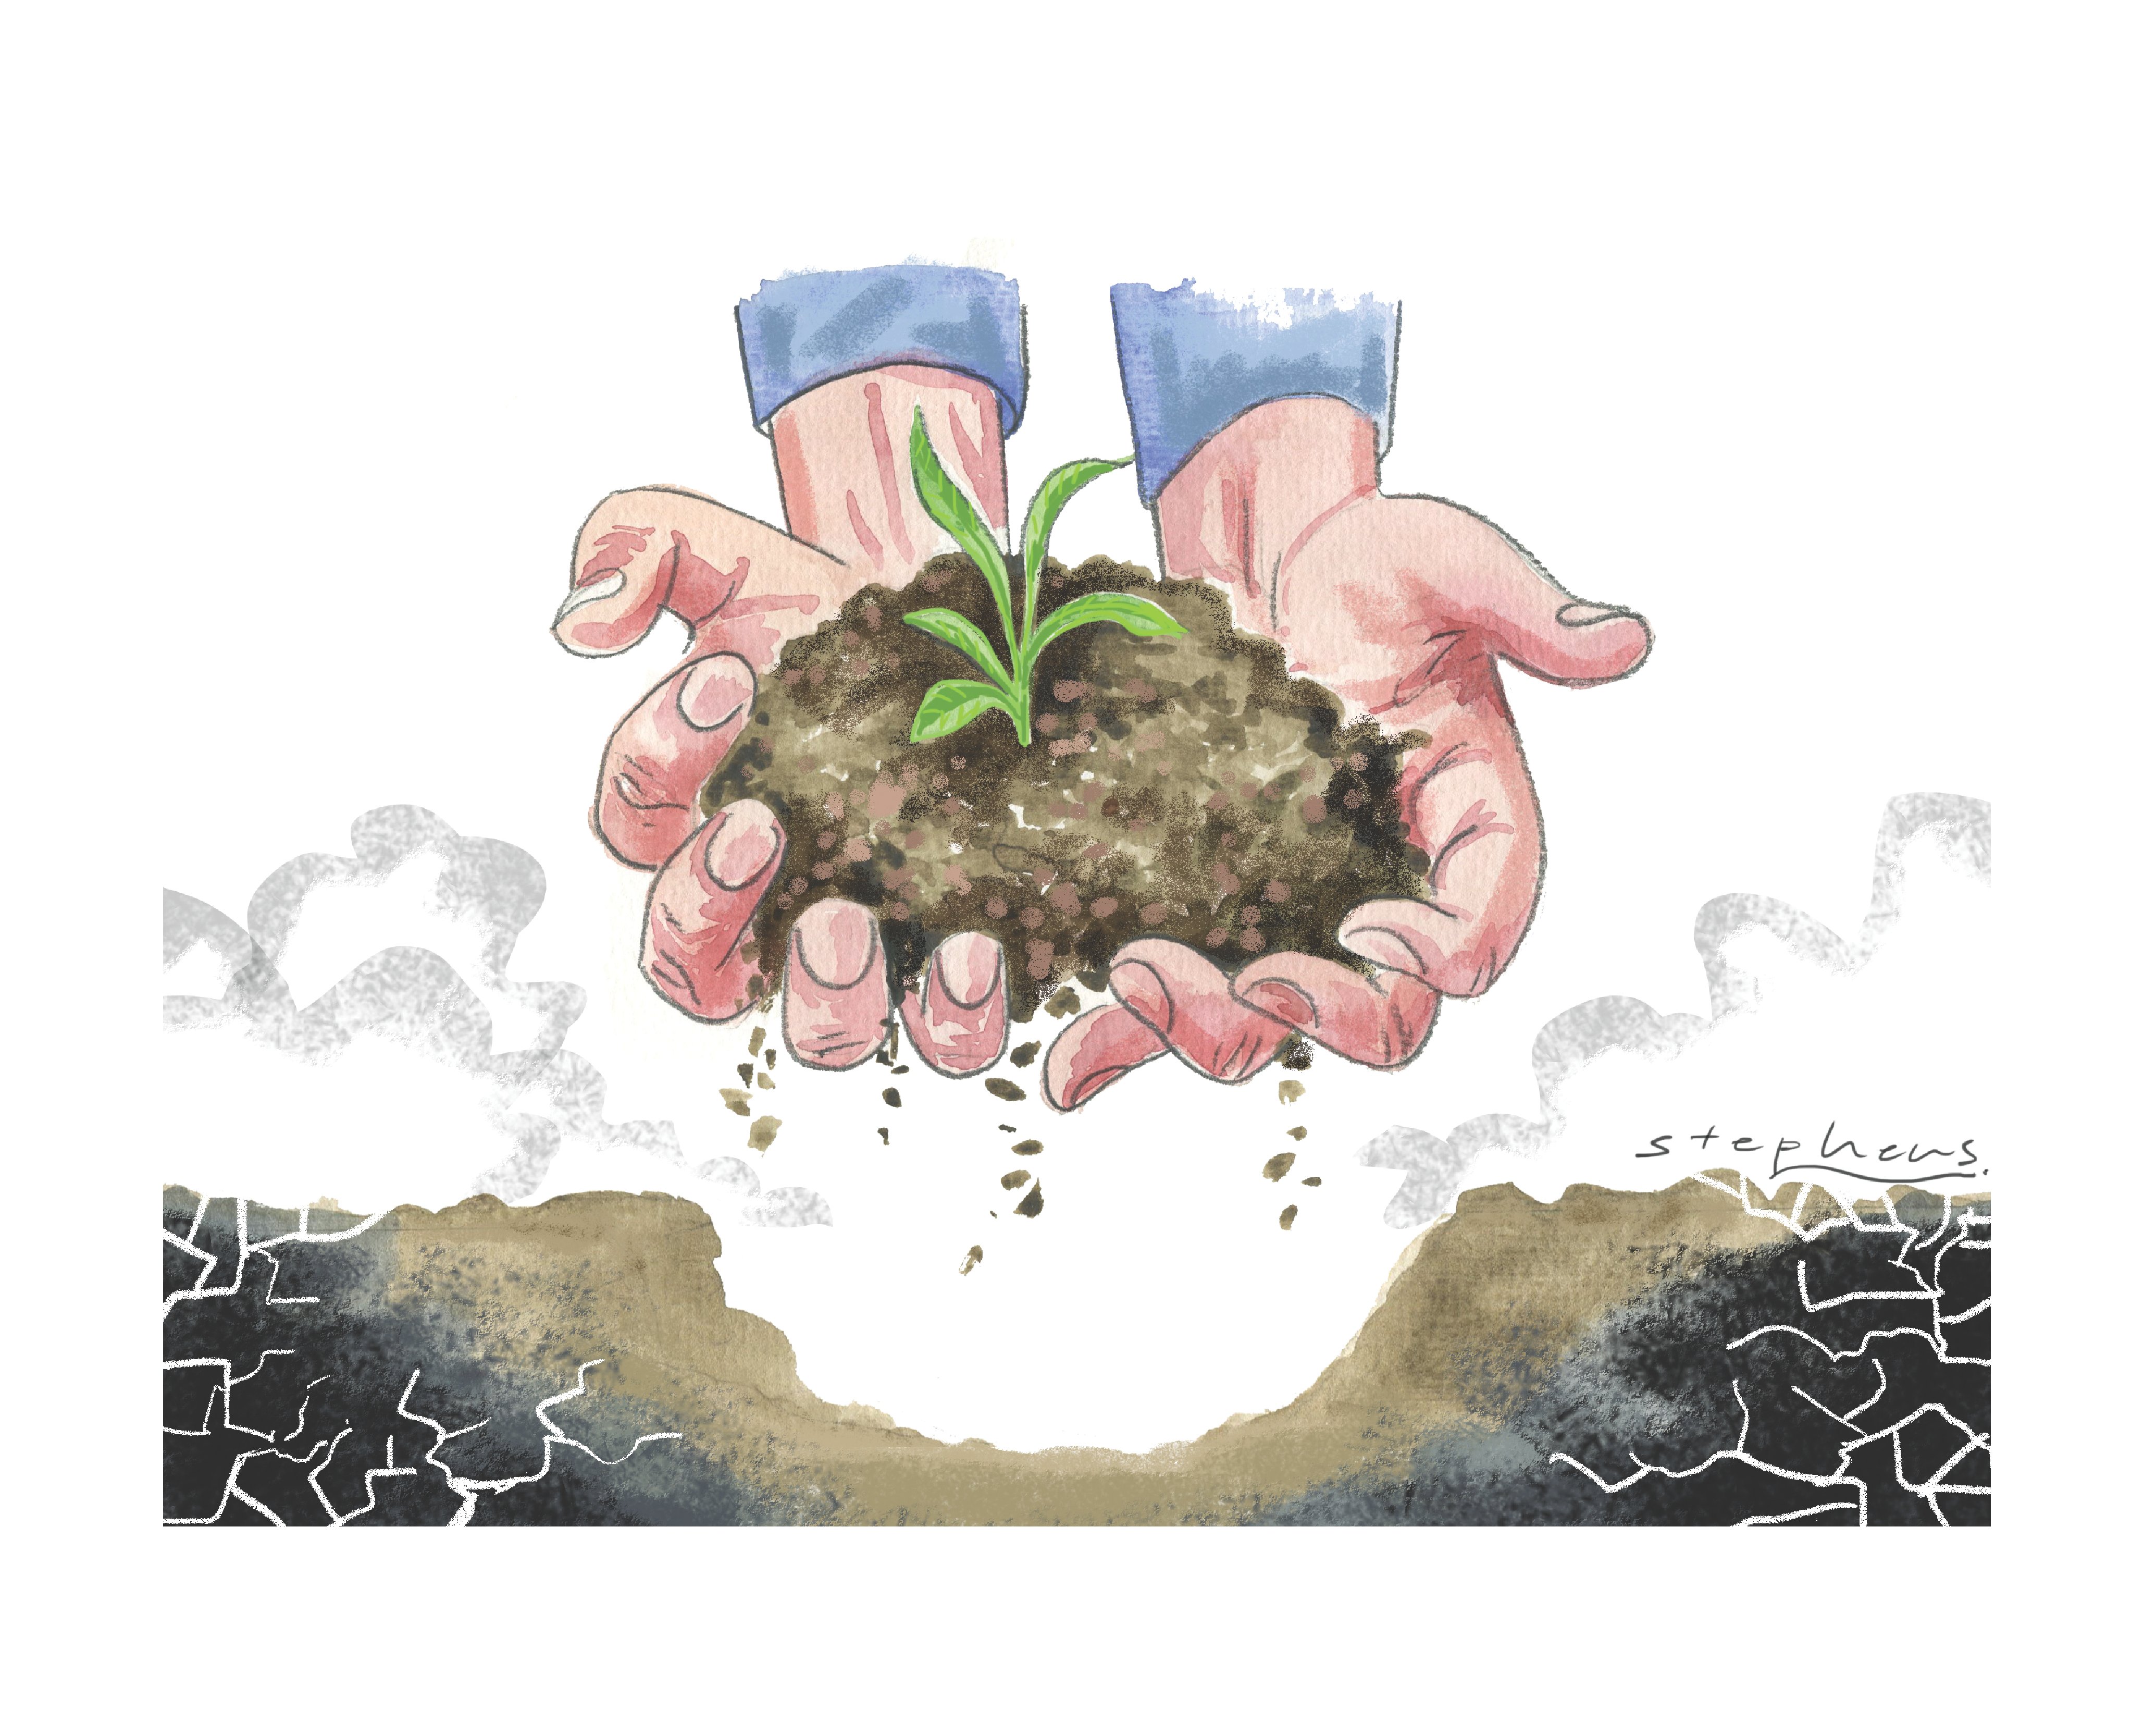 Soils filter water and store carbon; they are the cradle of life. 